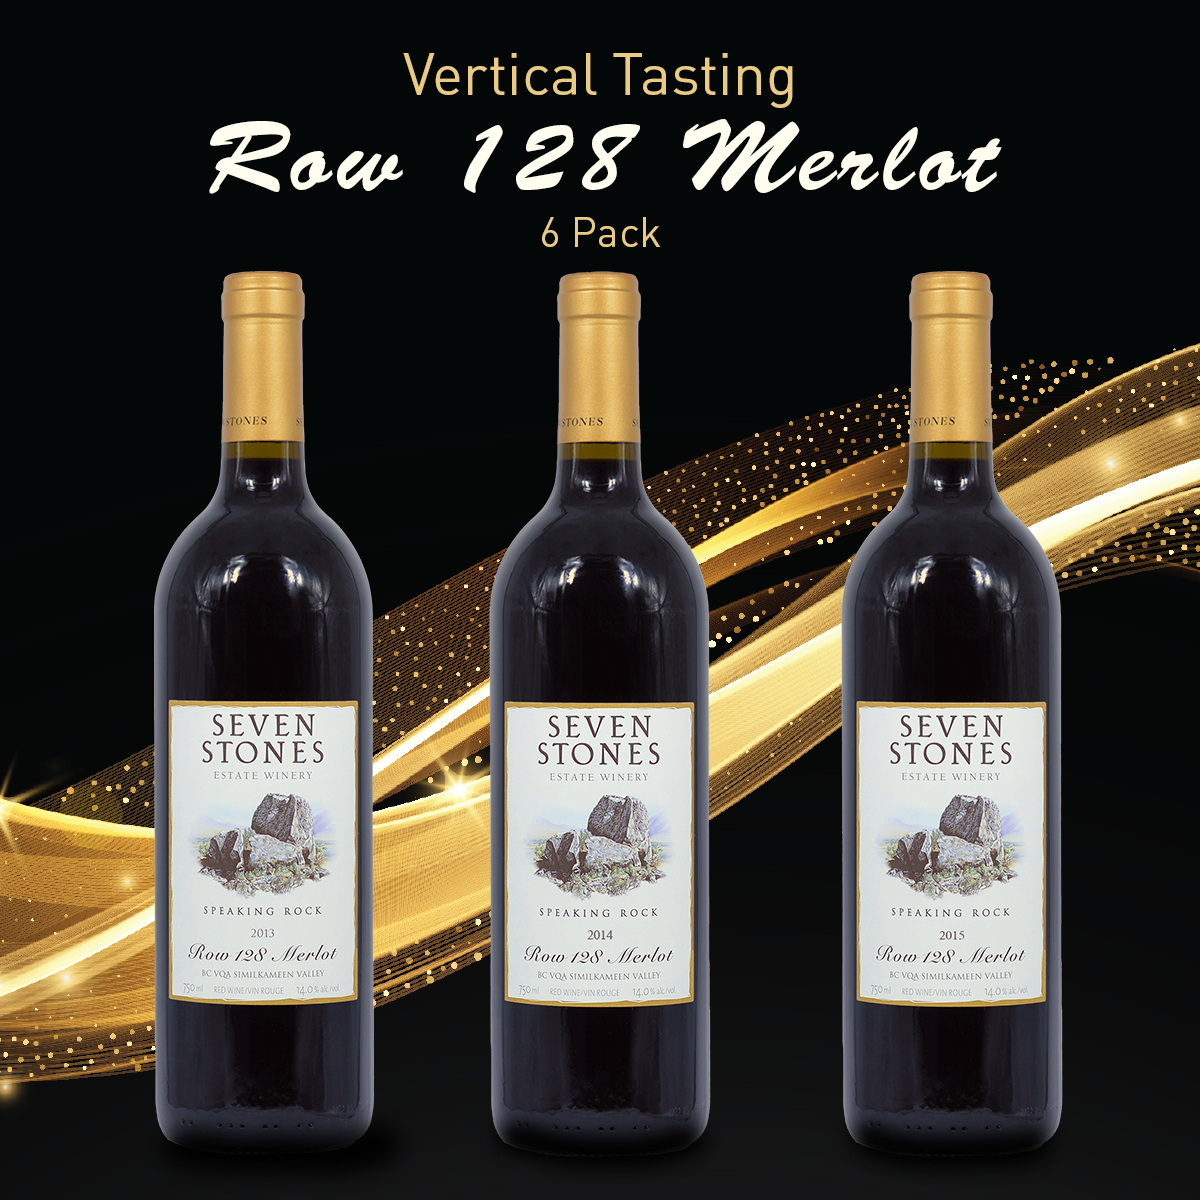 Product Image for Row 128 Merlot Vertical Tasting 6 Pack